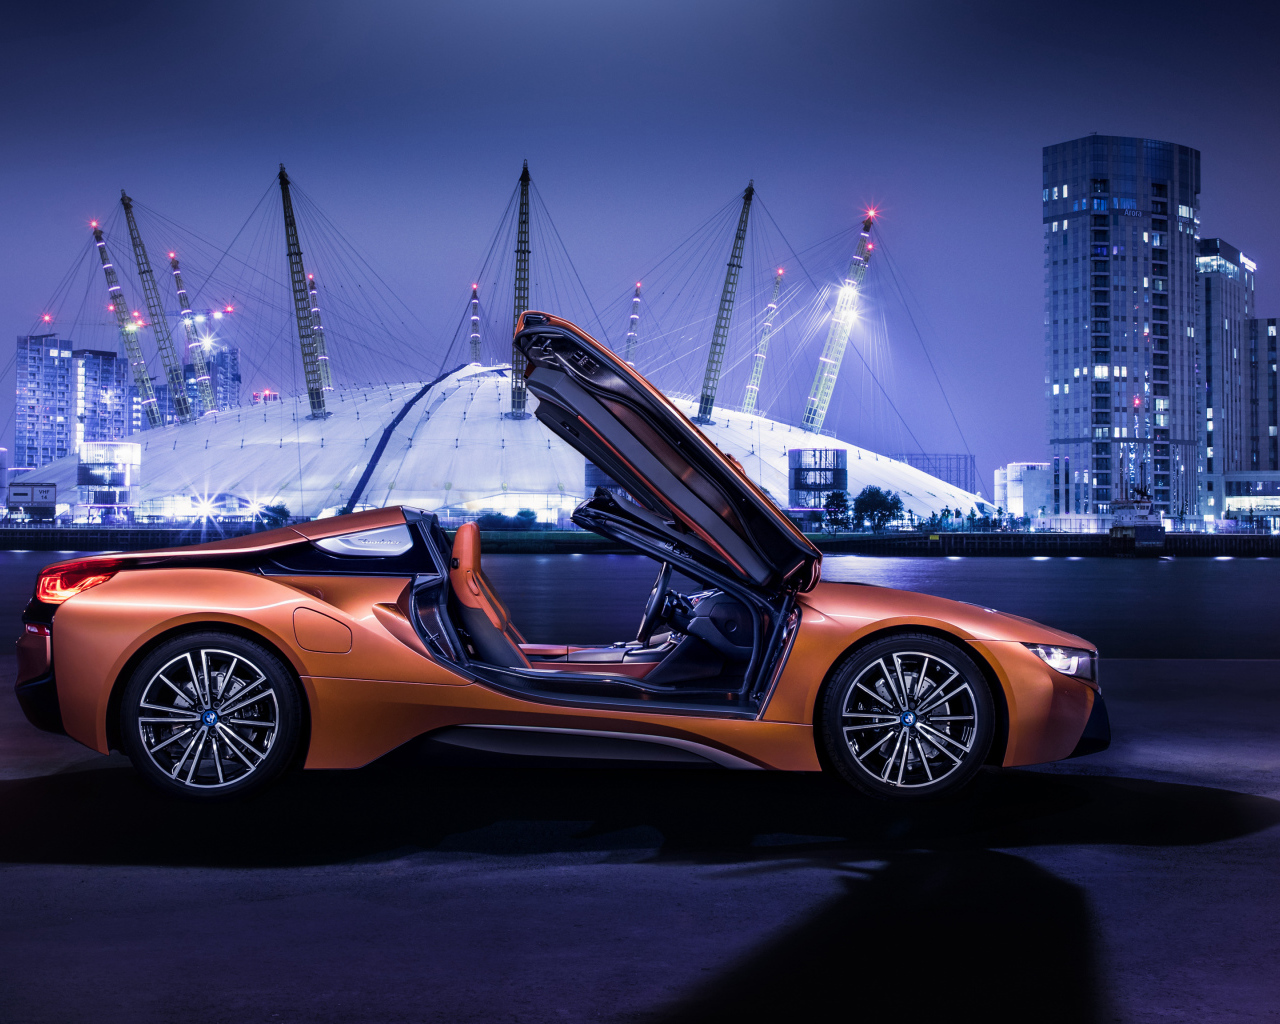 Sports car BMW I8 Roadster, 2018 with open doors